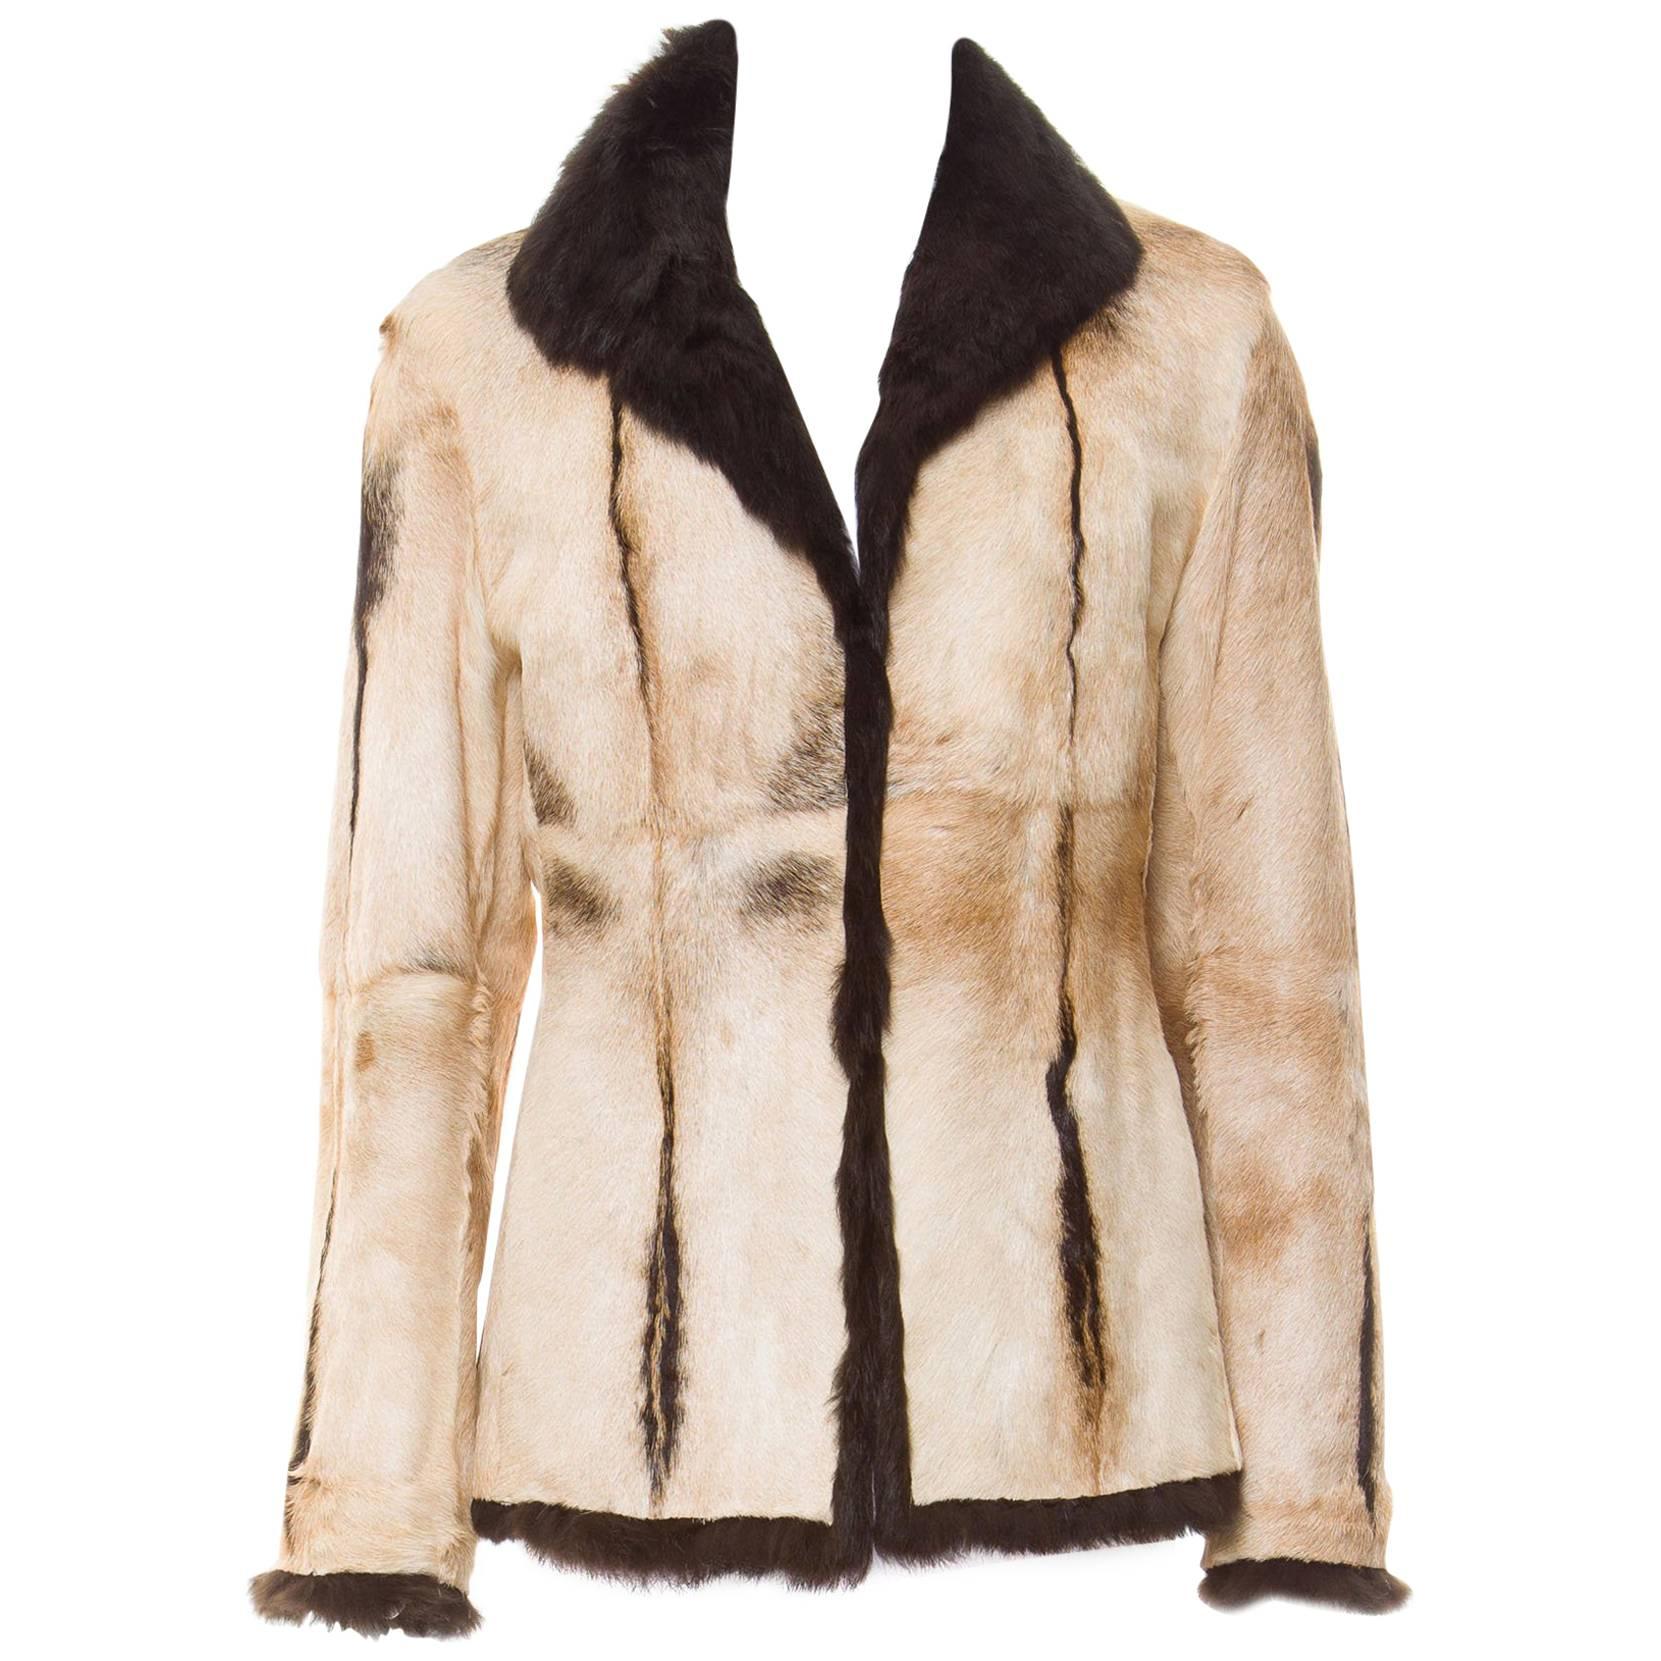 New Tom Ford for Gucci 1999 Collection Reversible Beige Fur Jacket It. 42